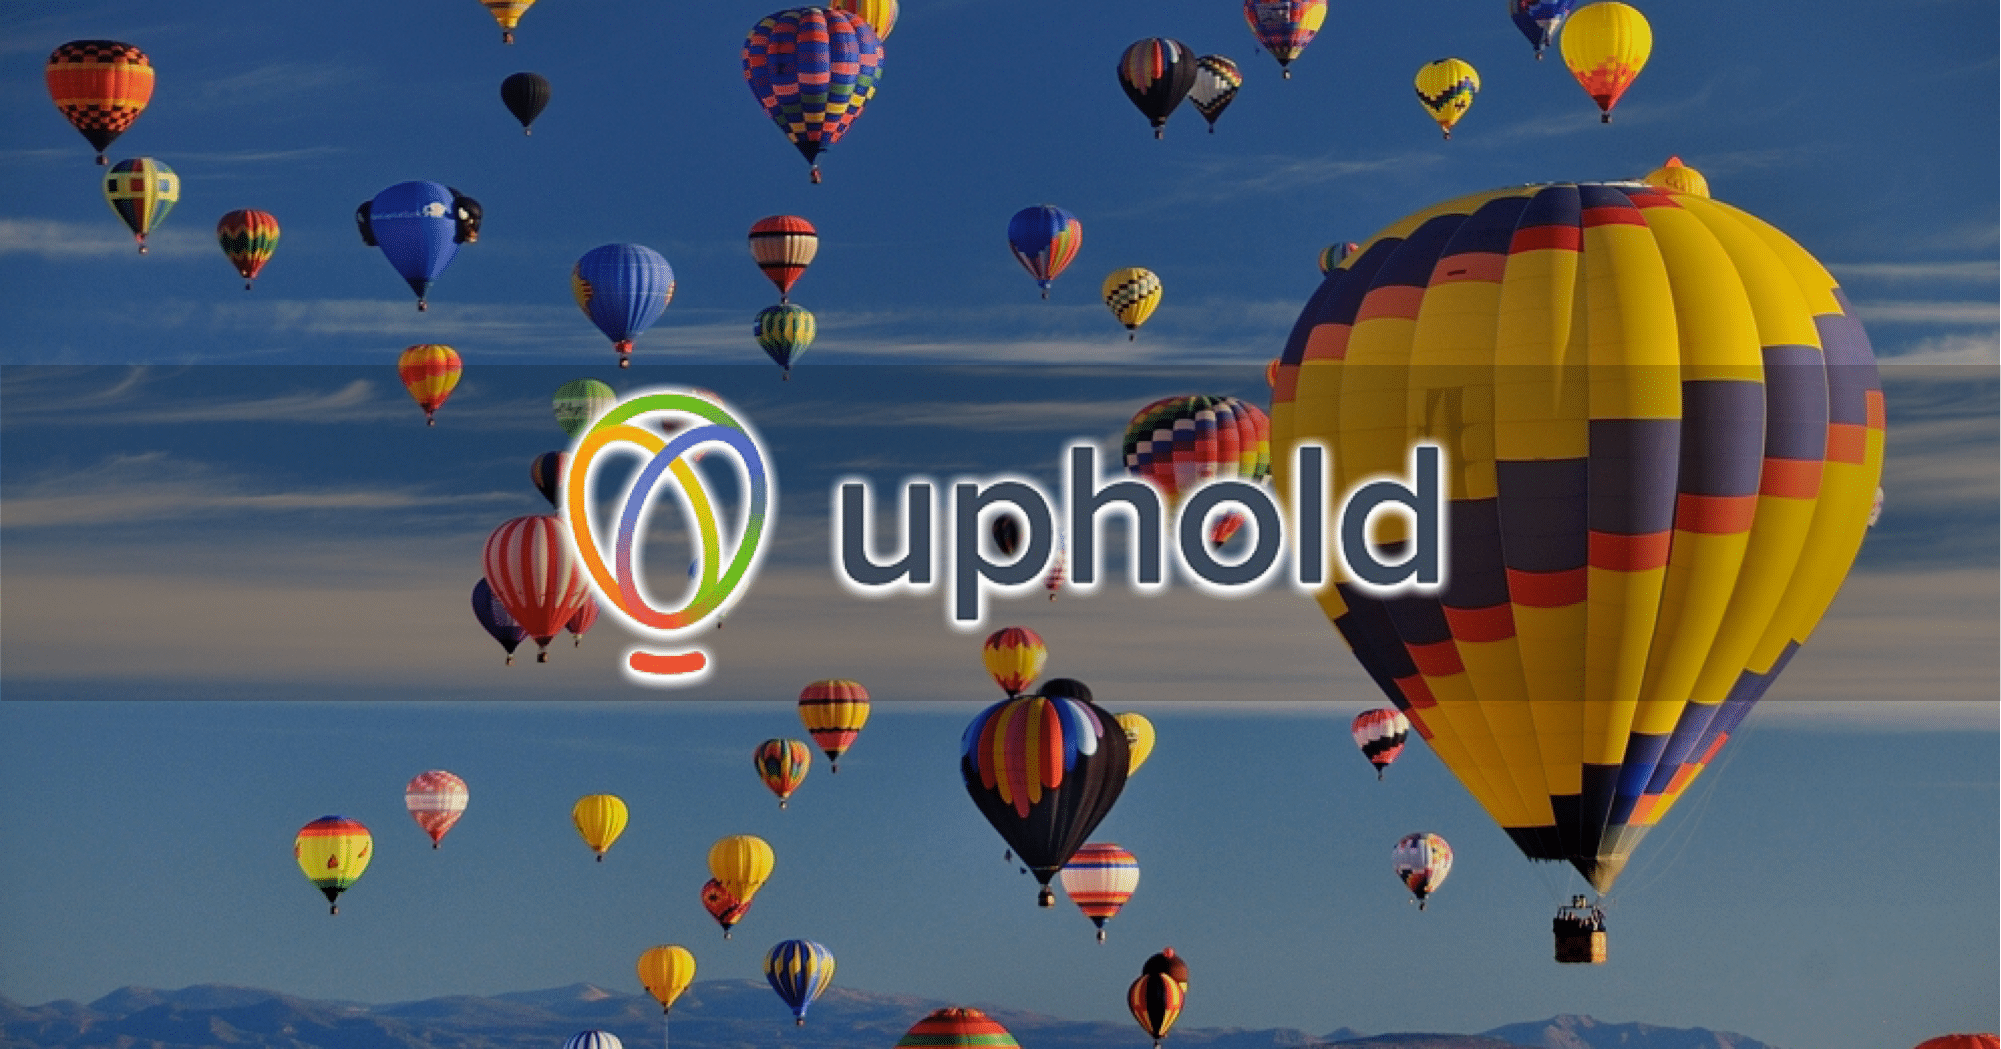 what is uphold crypto